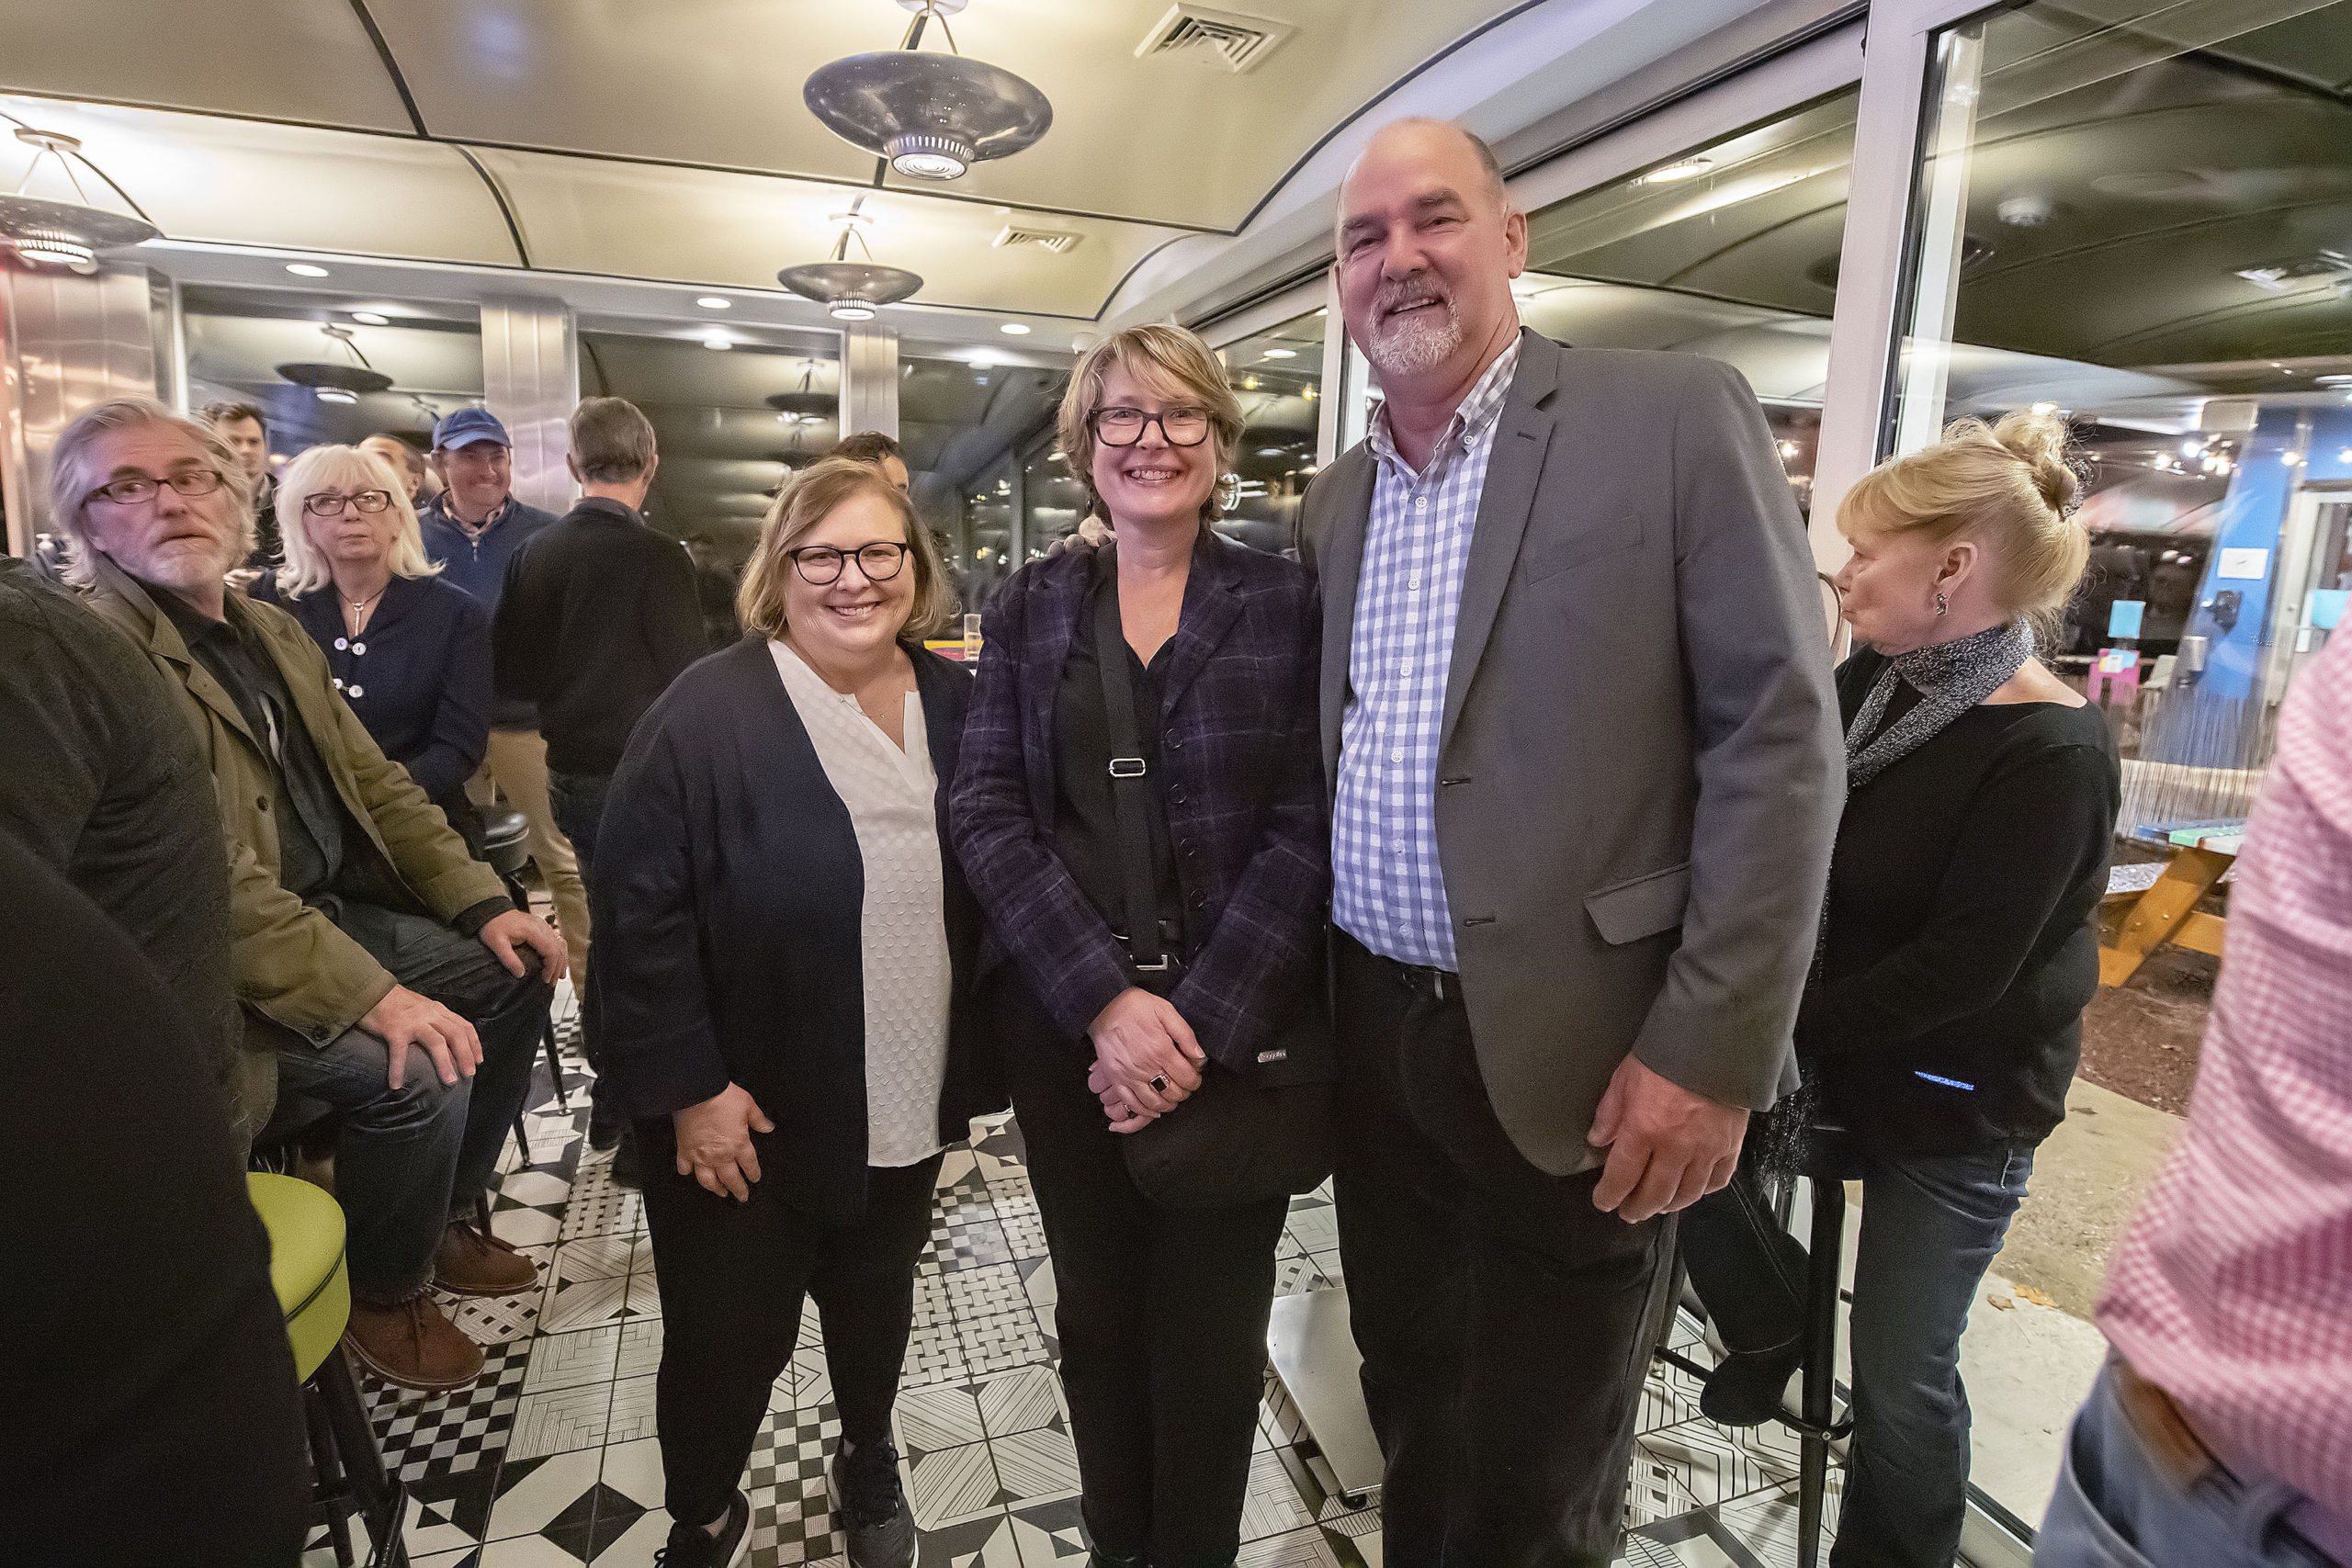 East Hampton Town Council candidates Cate Rogers and Kathee Burke-Gonzalez with Town Supervisor Peter Van Scoyoc at the Democratic post-election gathering at the Coche Comidor restaurant in Amagansett on Tuesday night.   MICHAEL HELLER